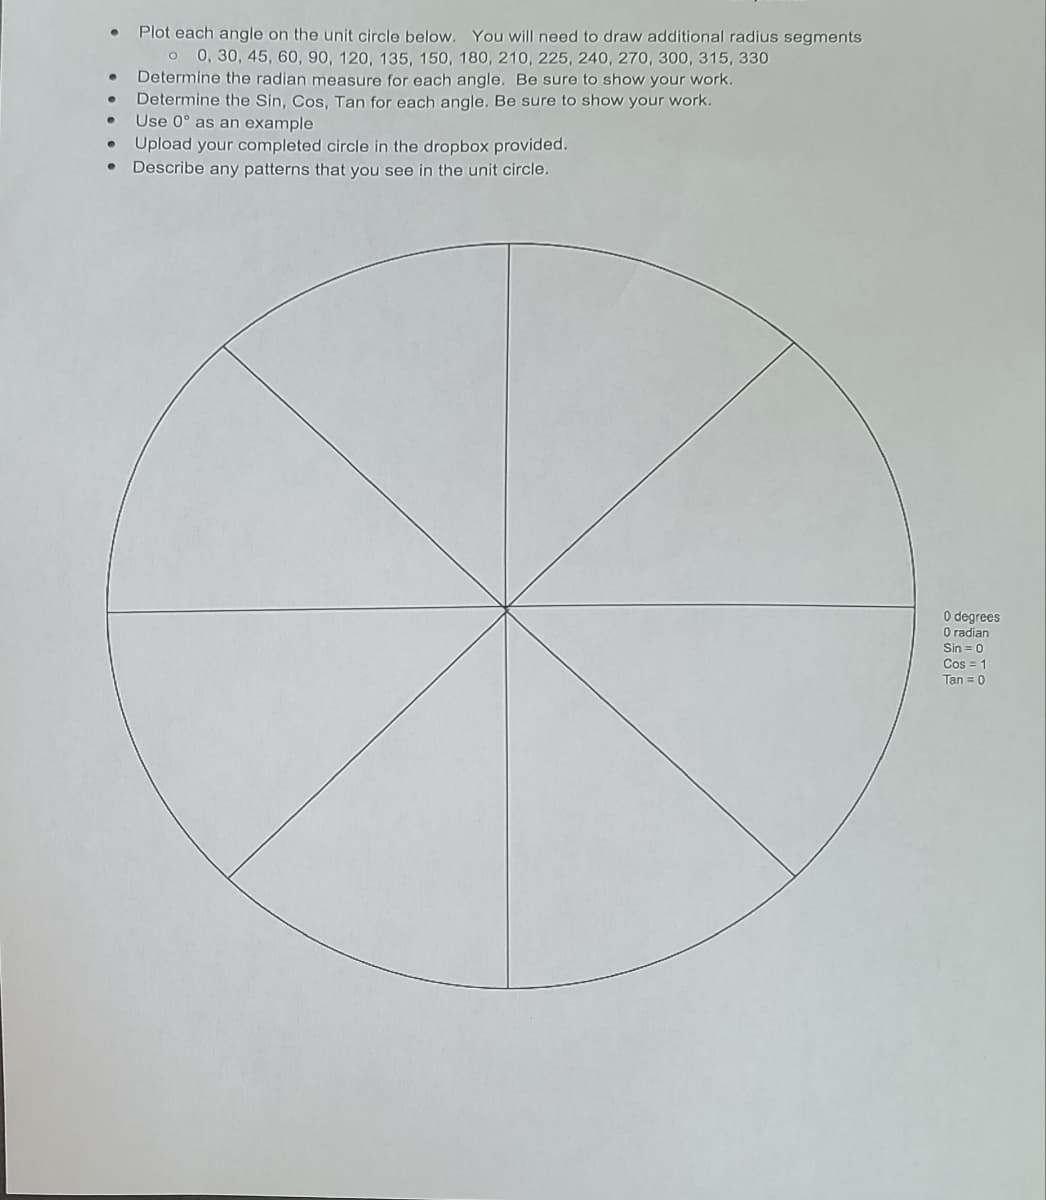 .
●
Plot each angle on the unit circle below. You will need to draw additional radius segments
O 0, 30, 45, 60, 90, 120, 135, 150, 180, 210, 225, 240, 270, 300, 315, 330
Determine the radian measure for each angle. Be sure to show your work.
Determine the Sin, Cos, Tan for each angle. Be sure to show your work.
Use 0° as an example
Upload your completed circle in the dropbox provided.
Describe any patterns that you see in the unit circle.
0 degrees
0 radian
Sin = 0
Cos = 1
Tan = 0